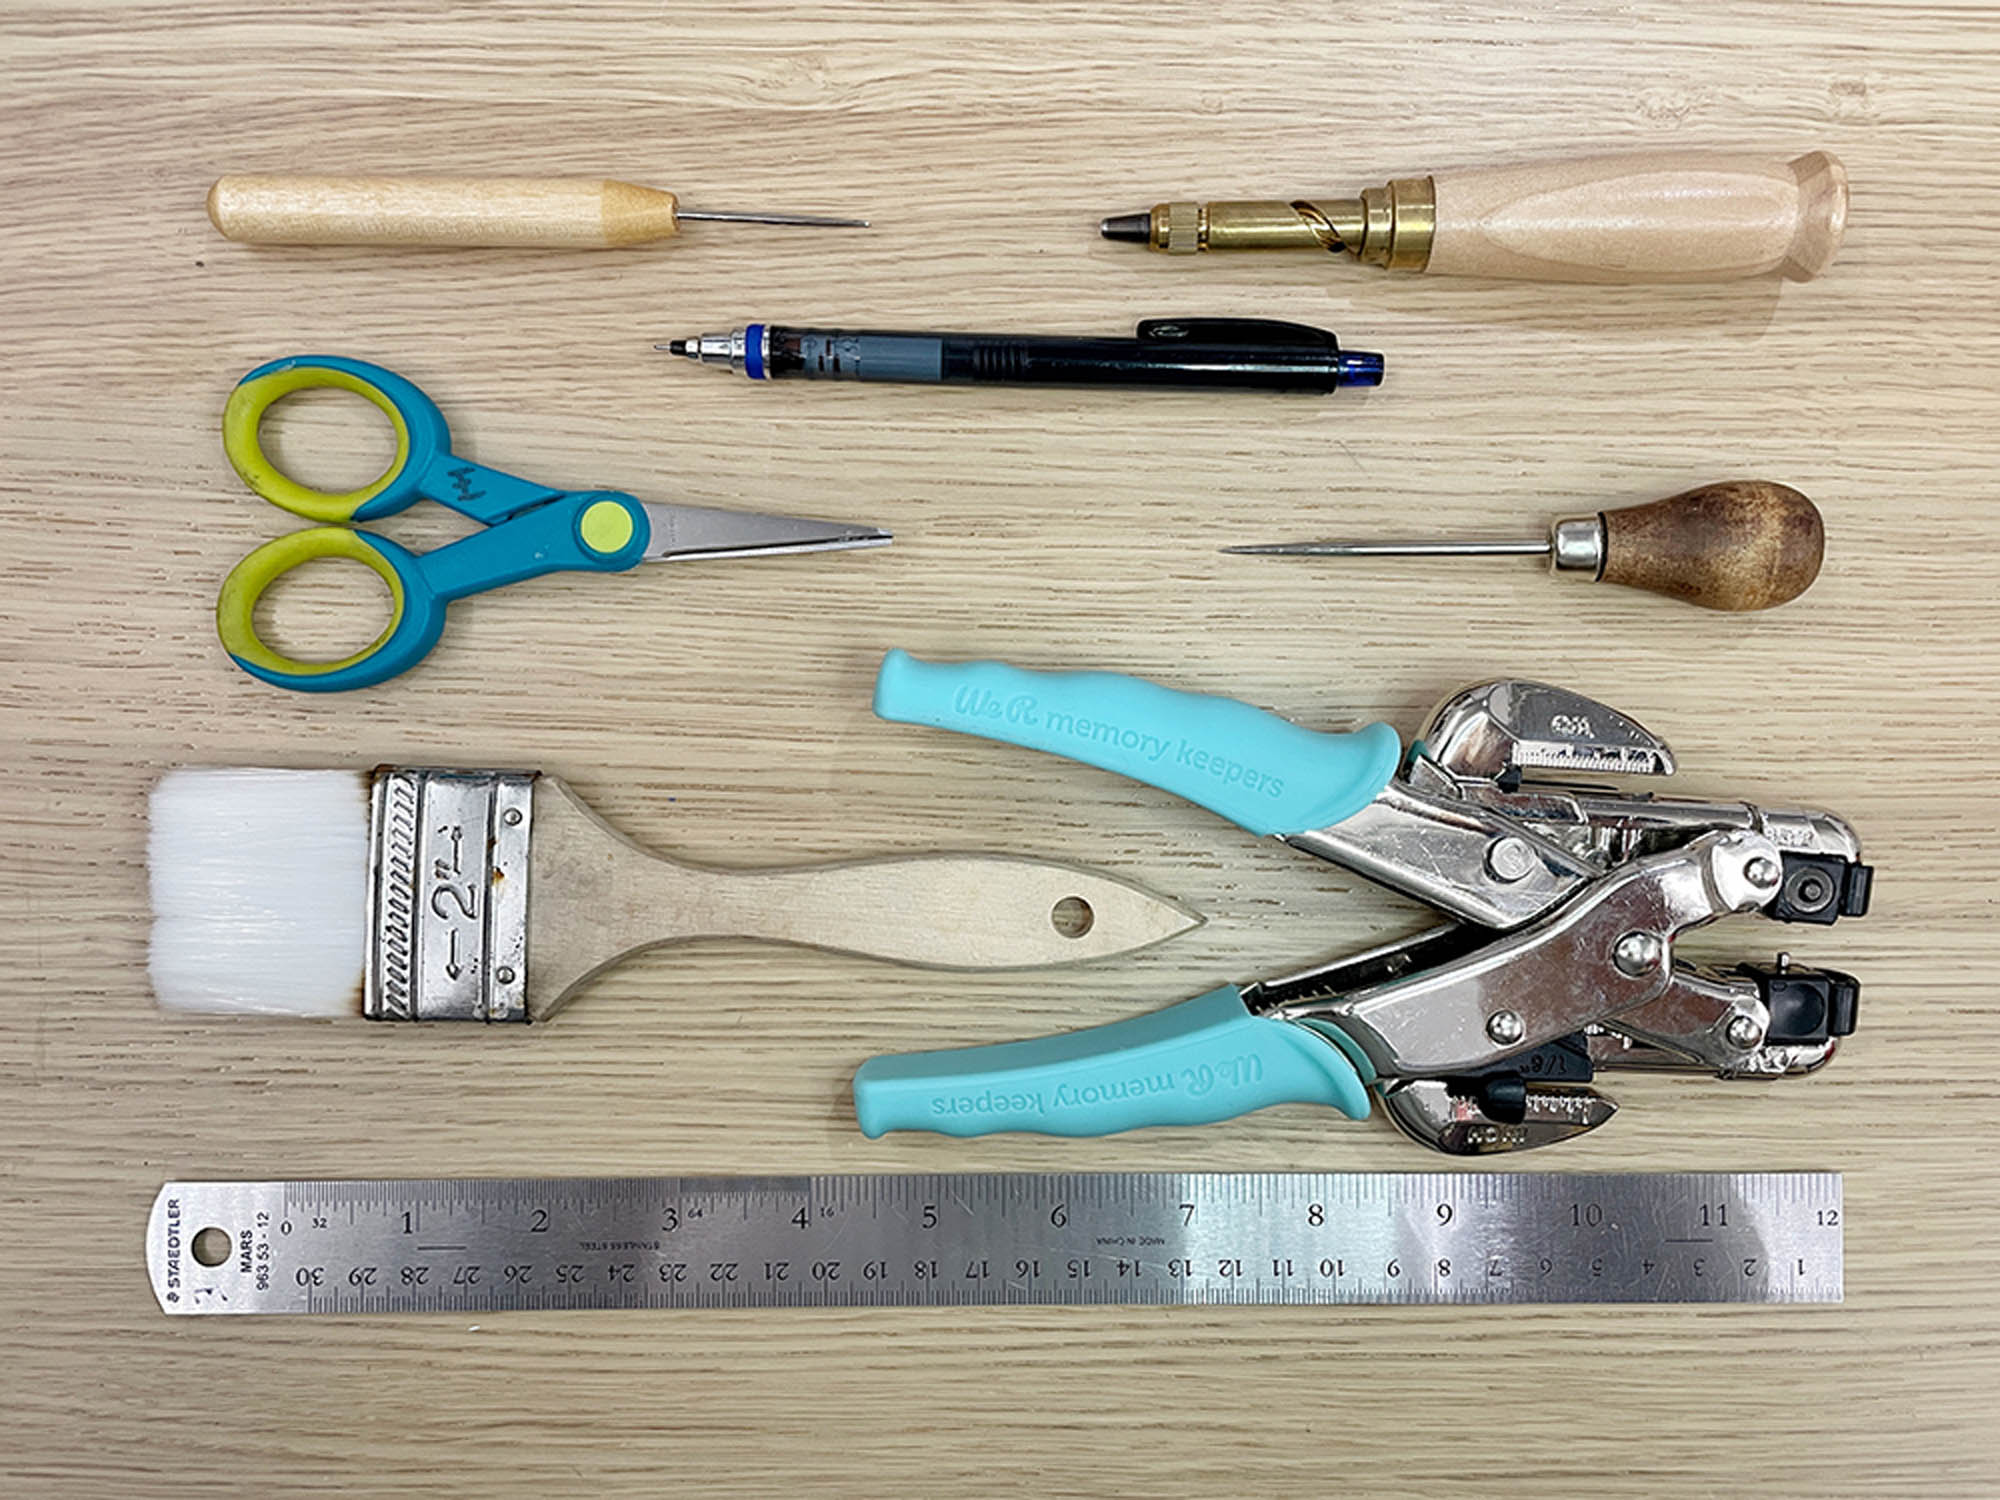 Bookbinding tools - By Evelyn Wong